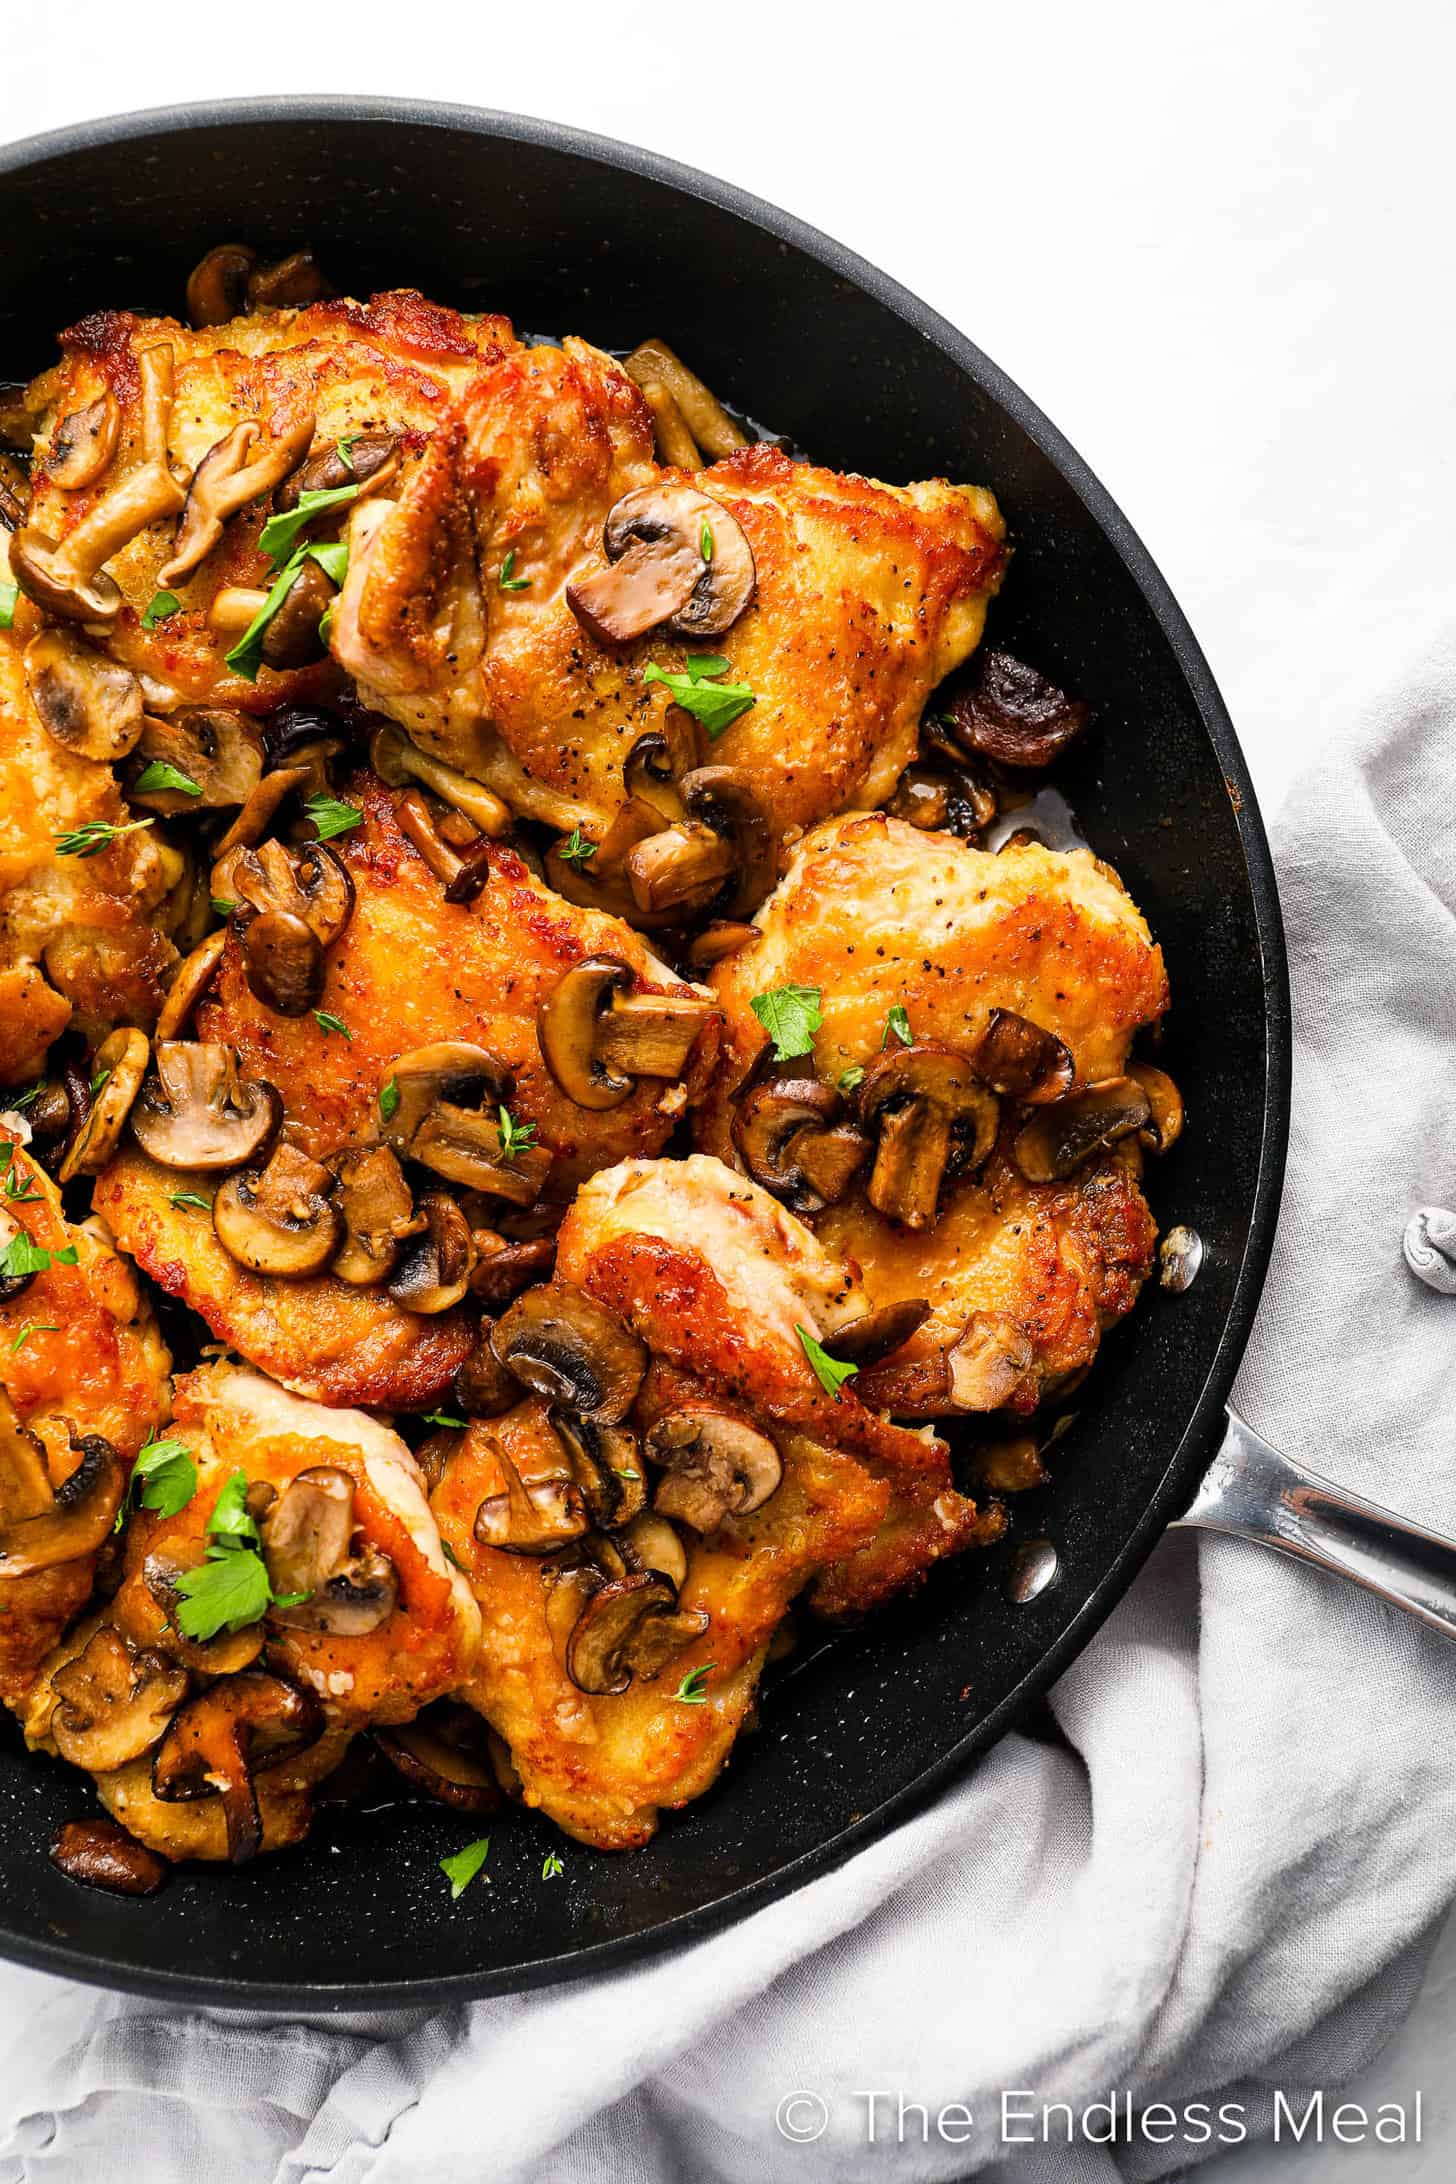 Cooking Chicken and Mushrooms in a pan